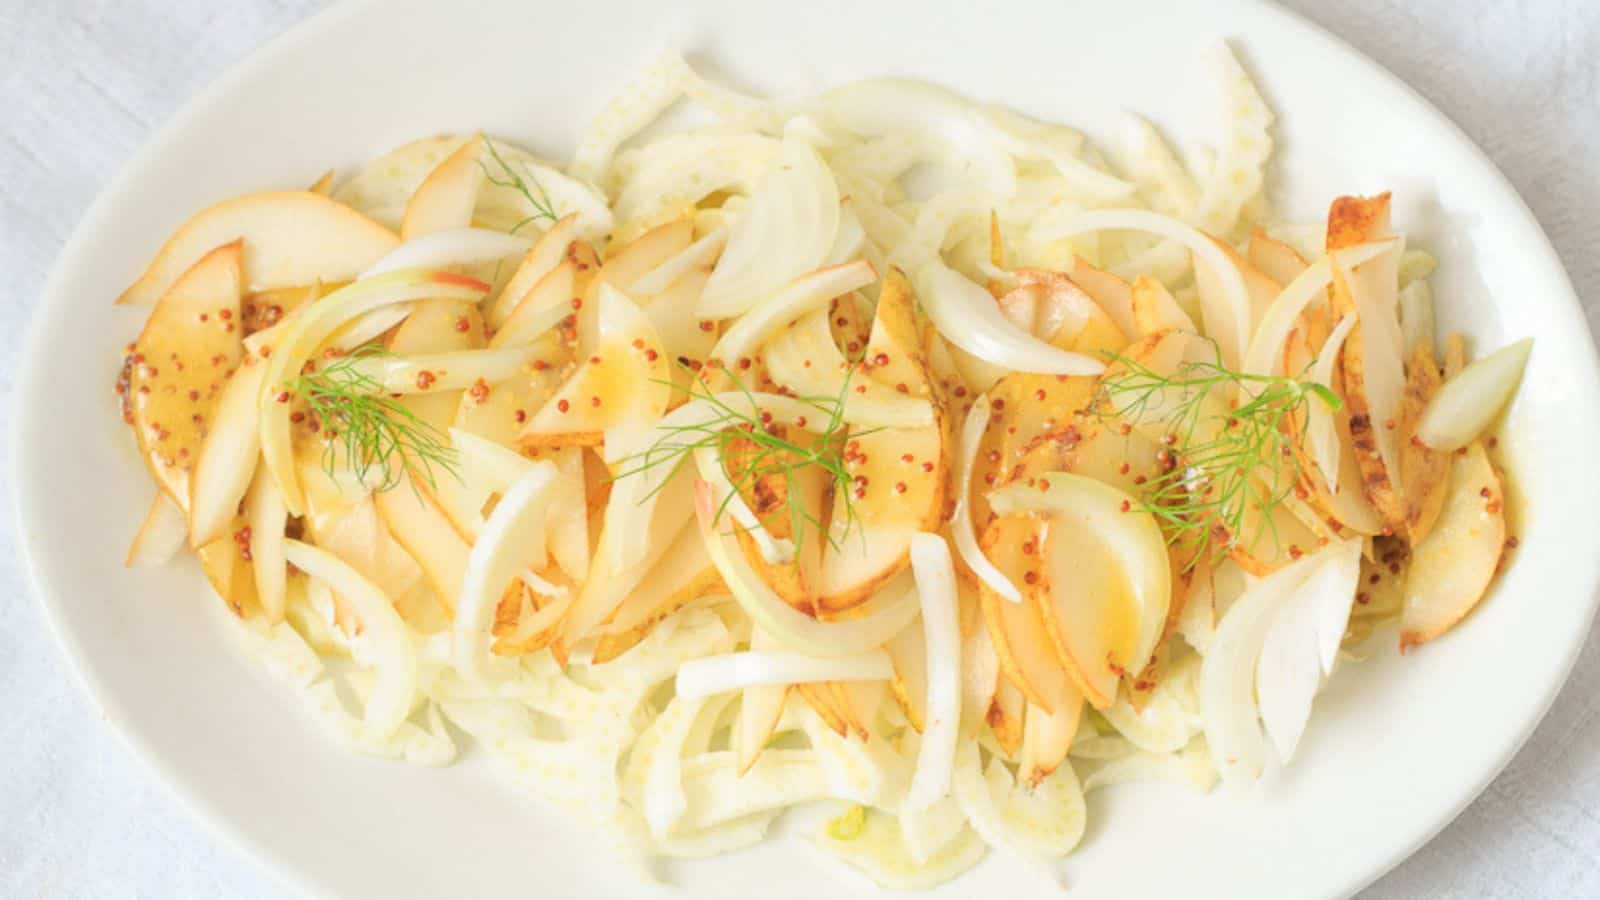 Fennel salad with pears on white platter.